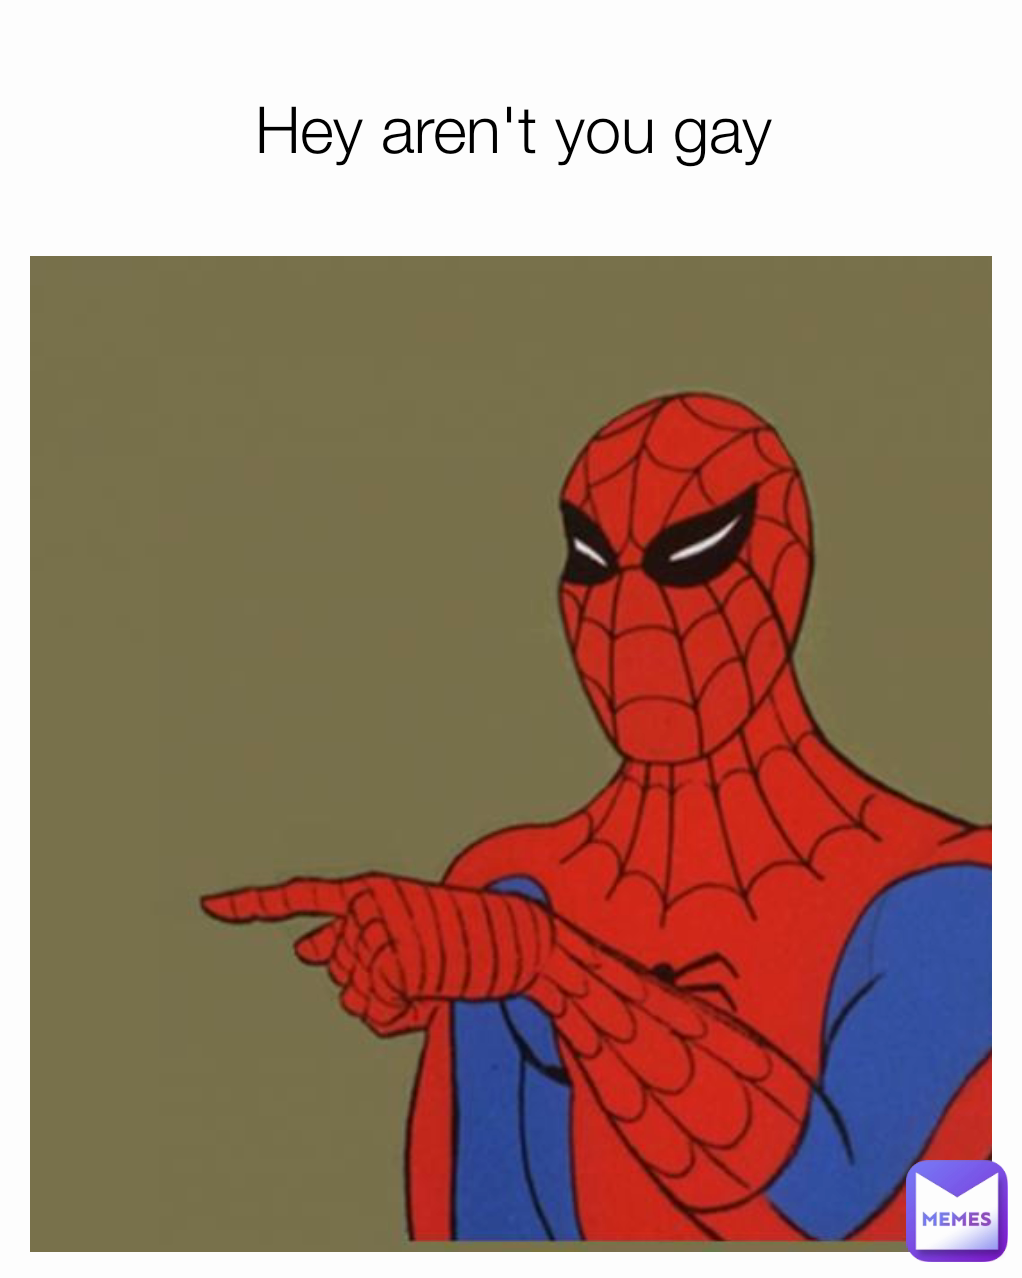 what are you gay meme